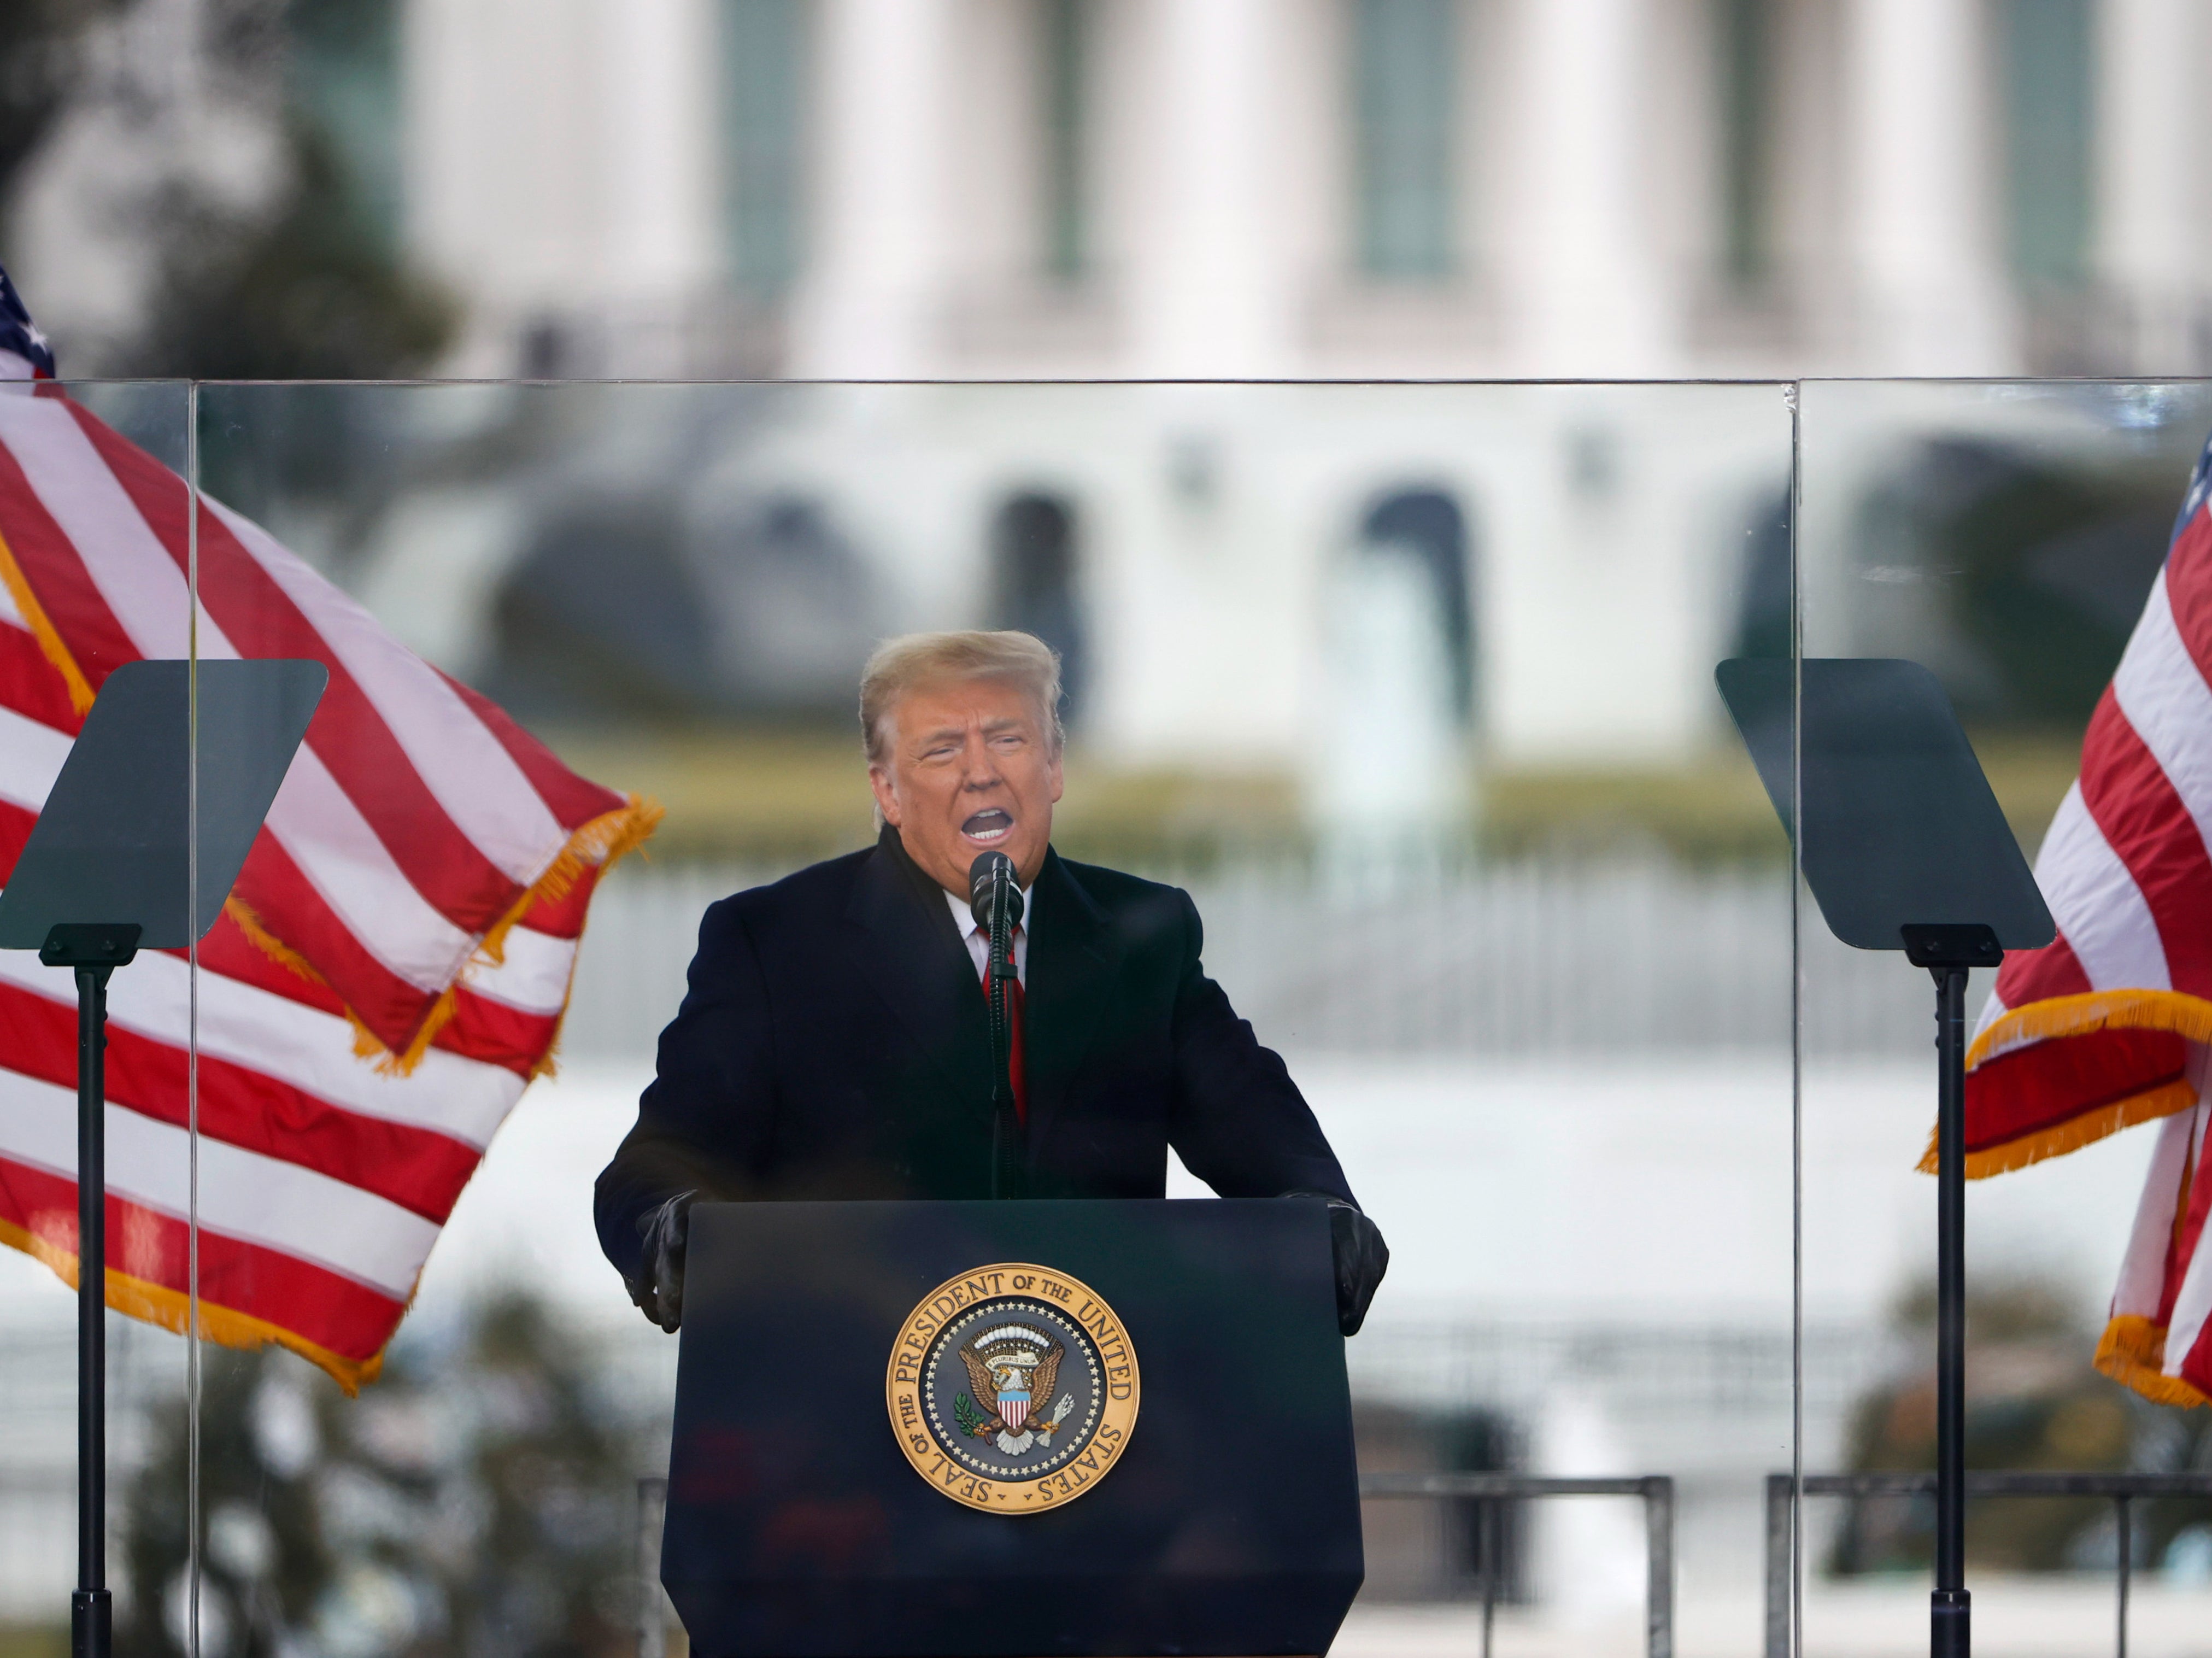 Trump speaks at his ‘Stop the Steal’ rally outside the White House on 6 January 2021